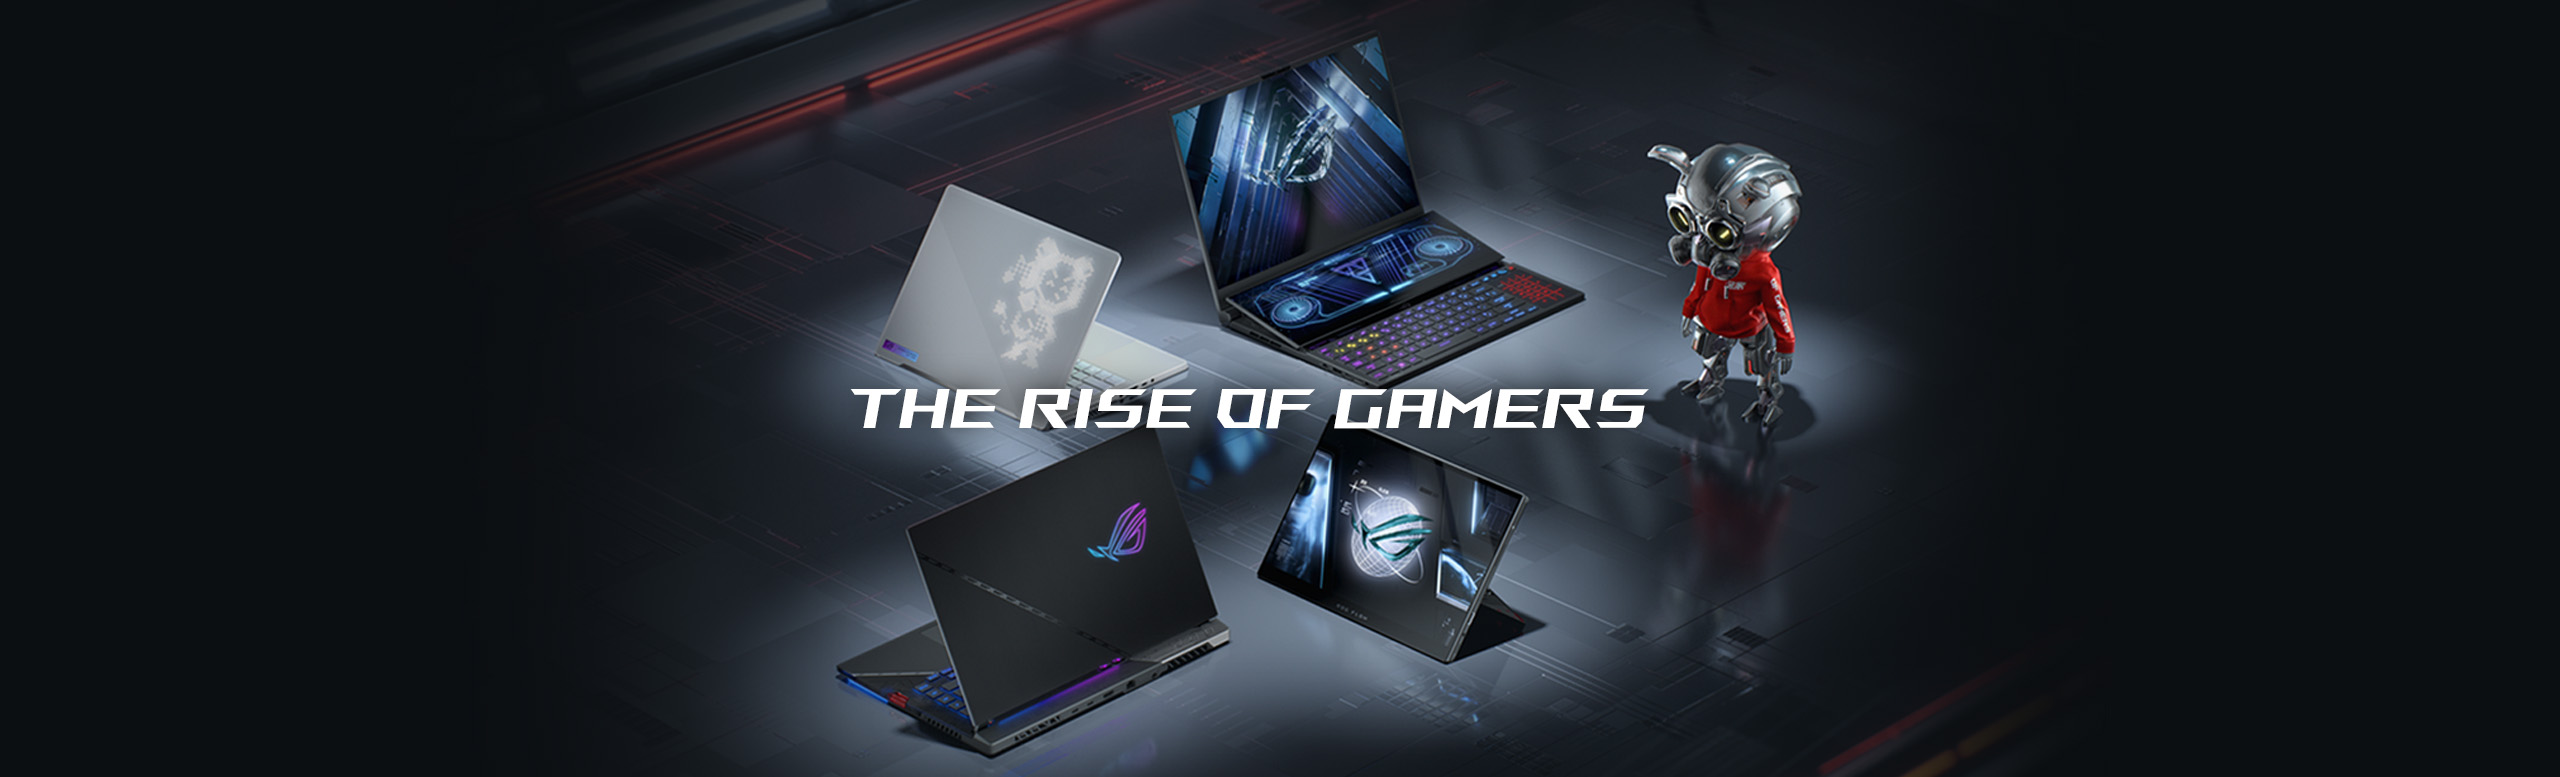 ROG Republic of Gamers/ The Rise of Gamers.